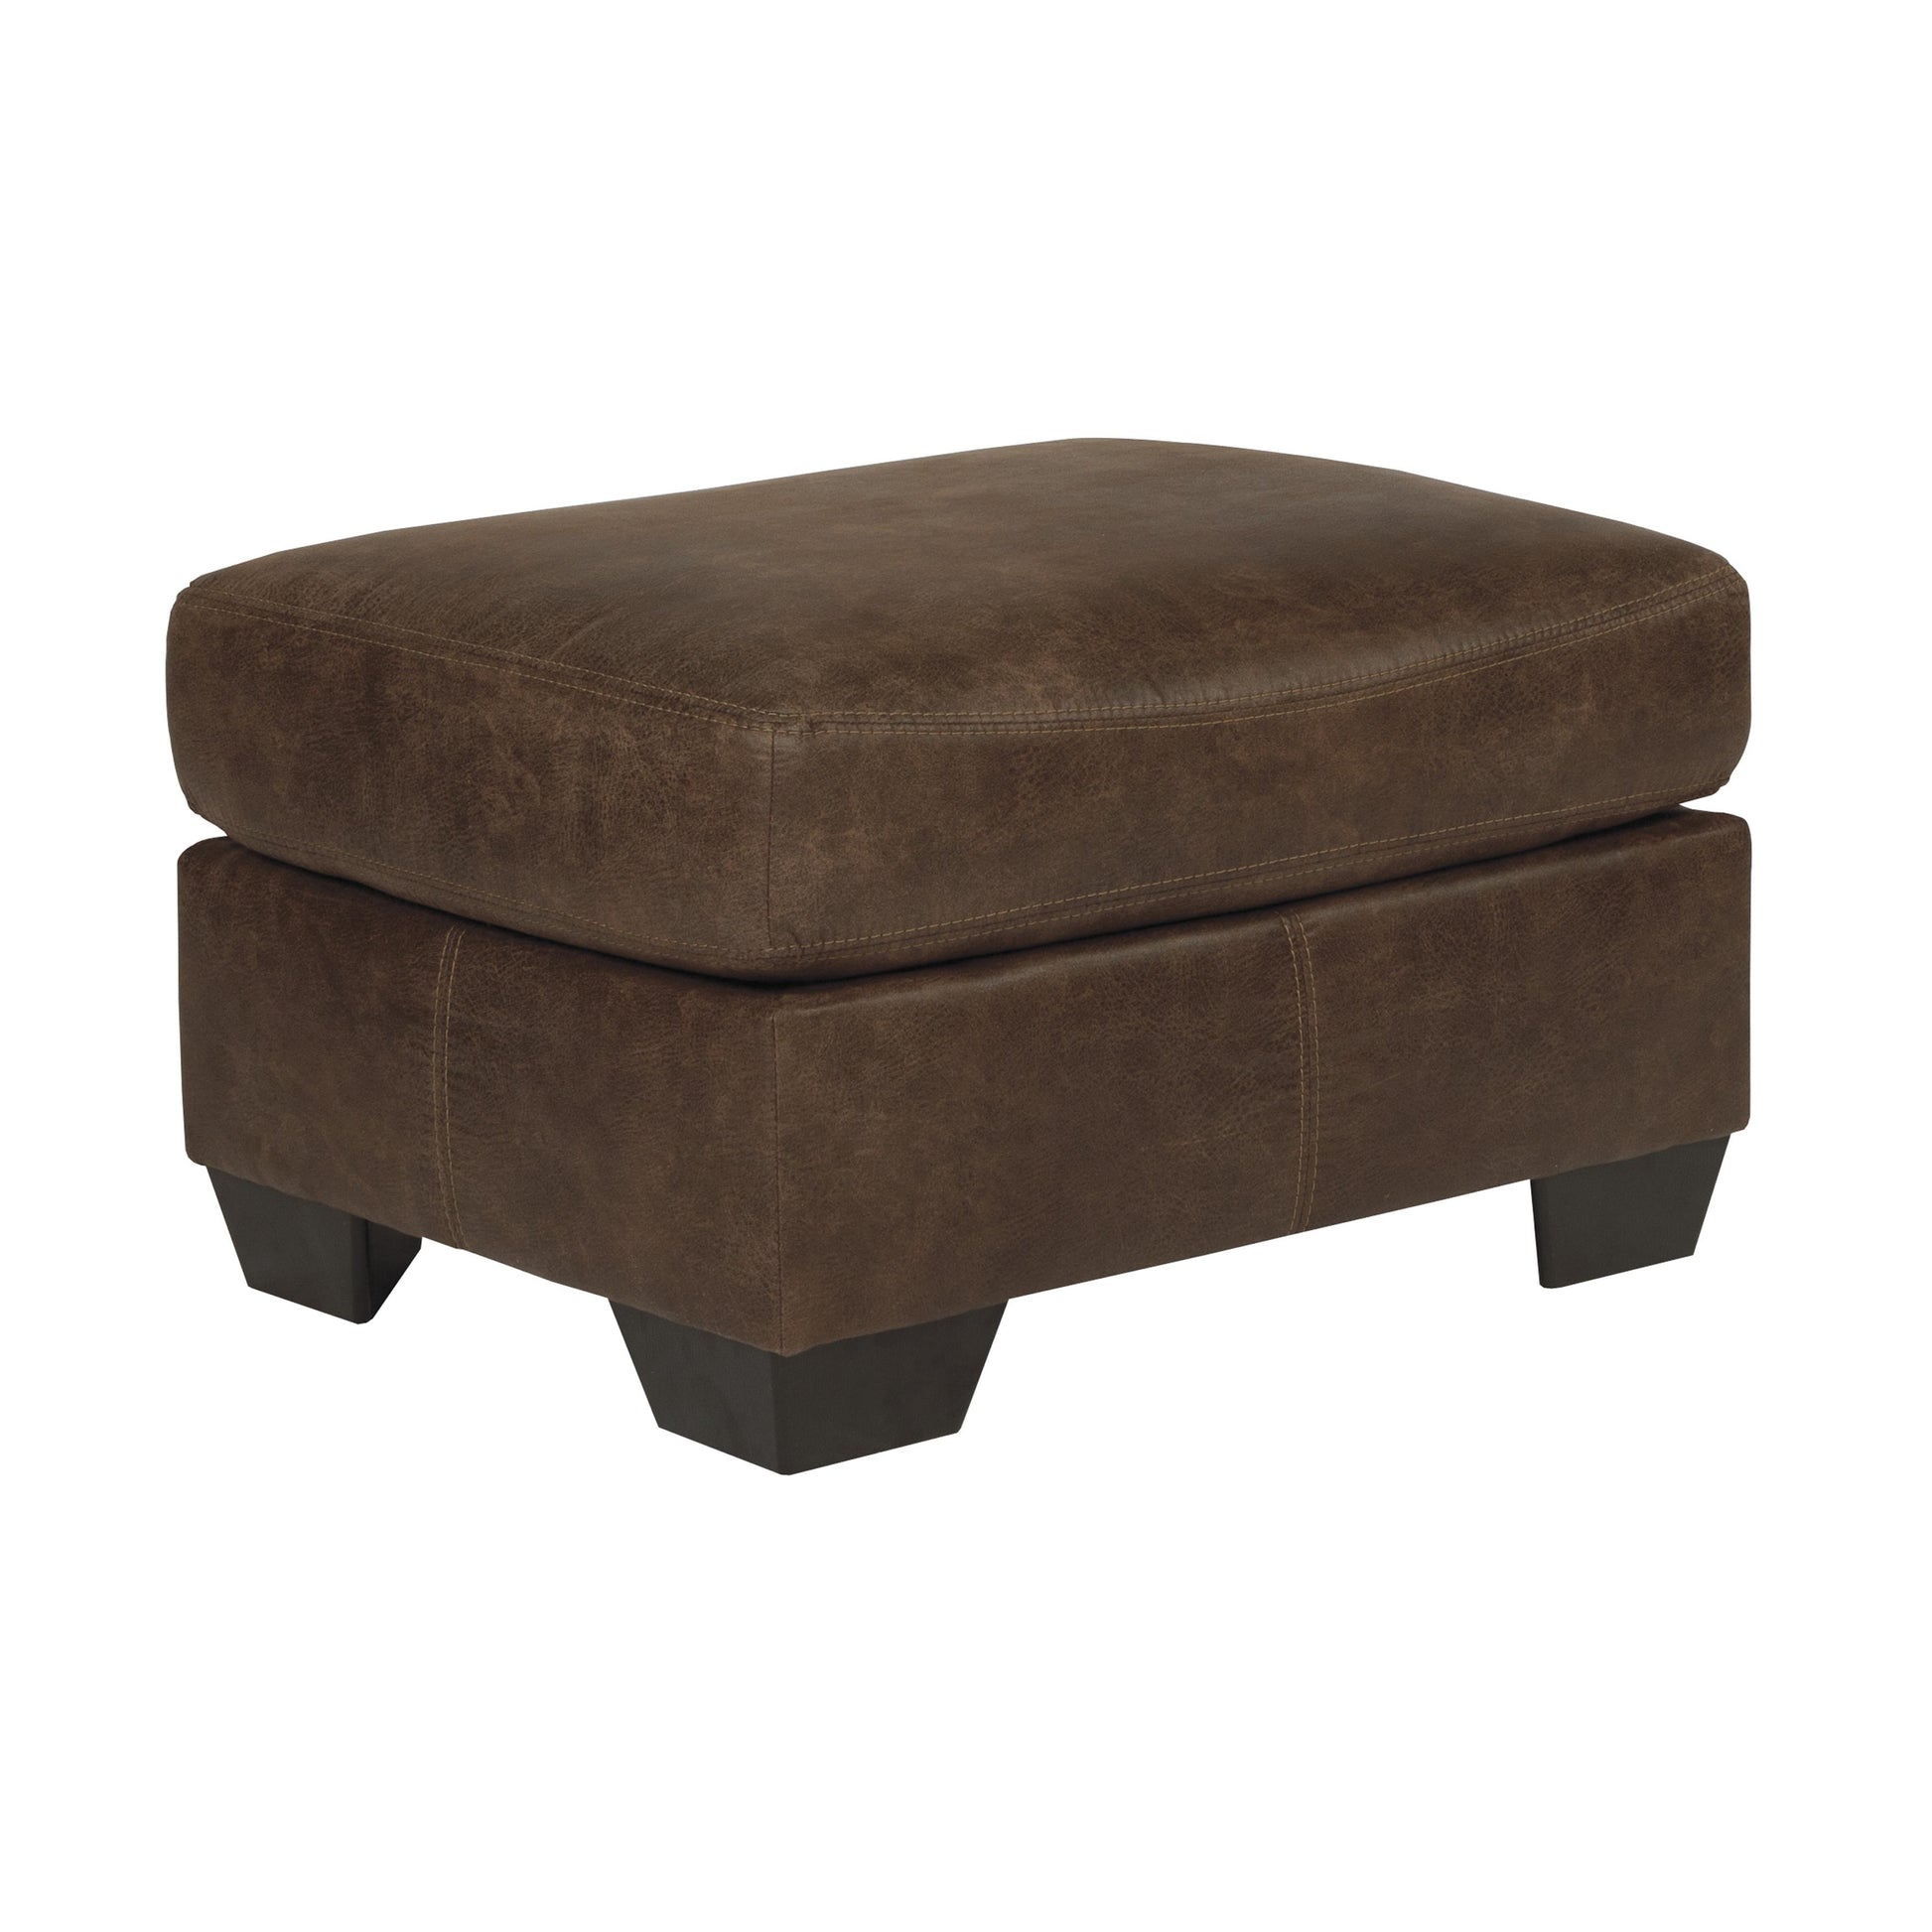 Signature Design by Ashley Bladen Leather Look Ottoman 1202014